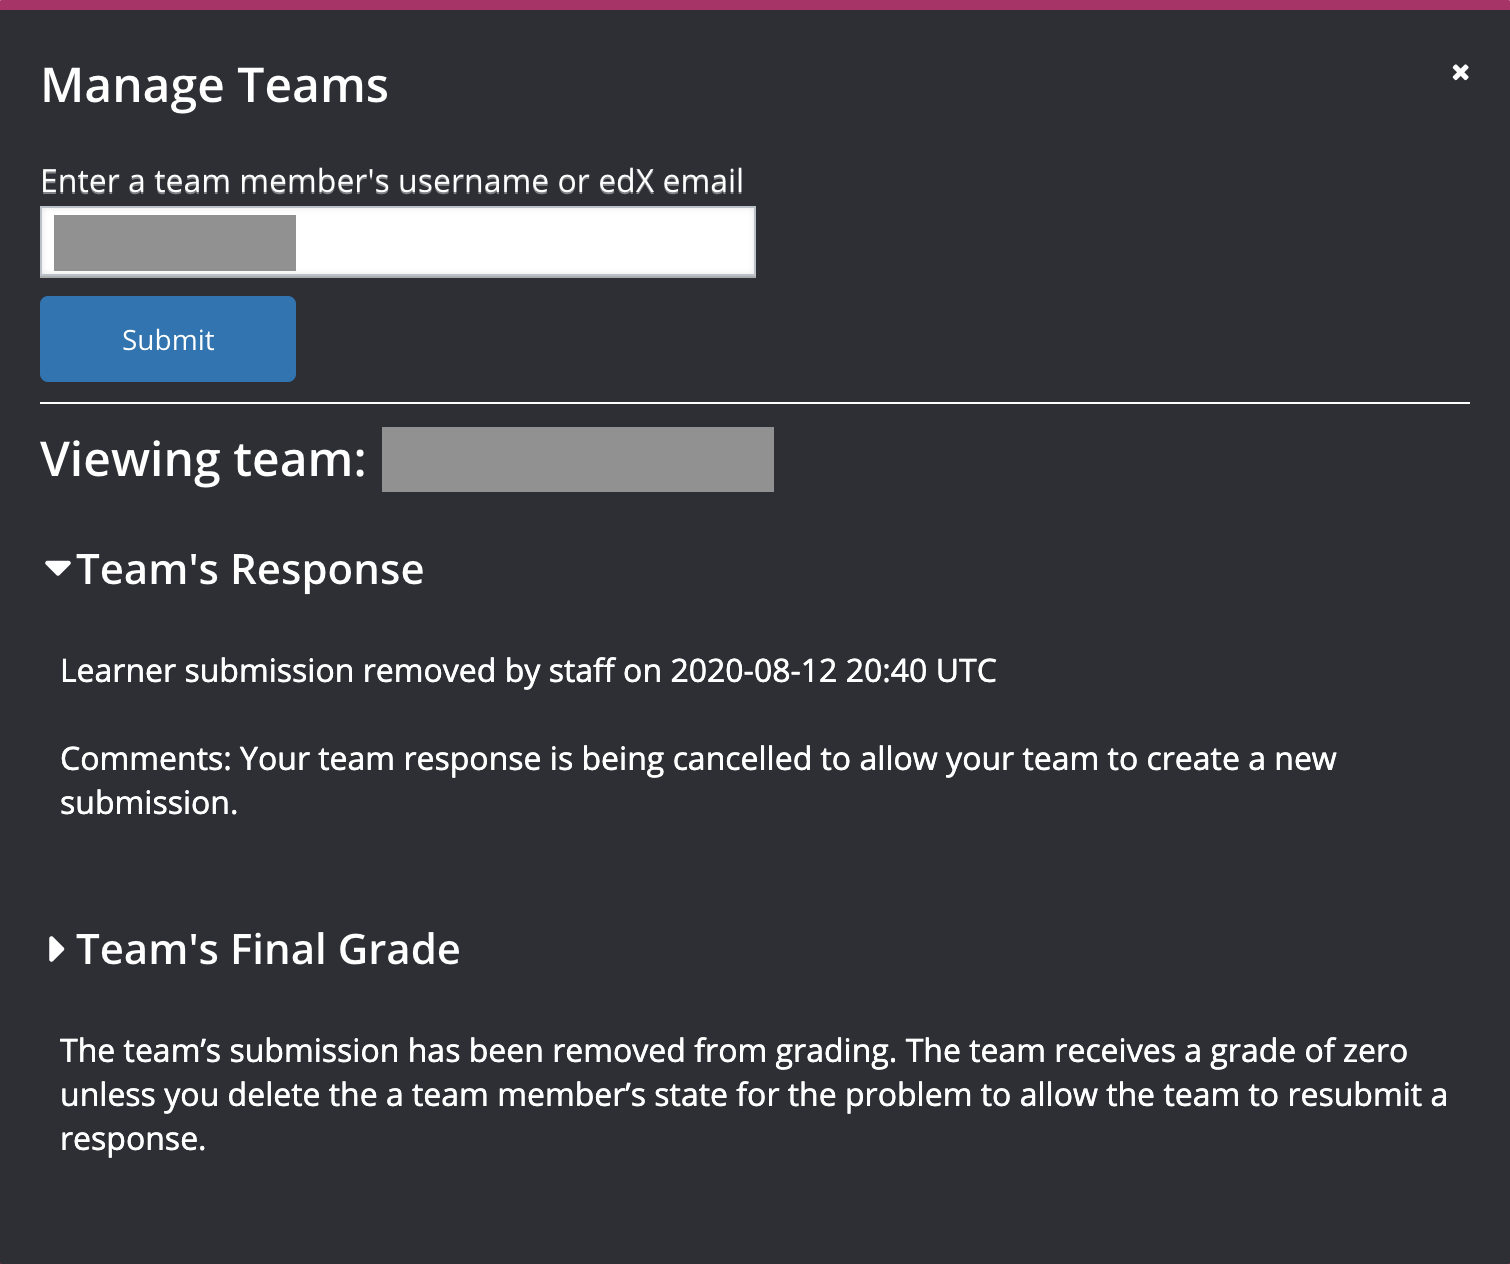 In Manage Teams, the date, time and comment for removal of a team response is shown instead of the original response.